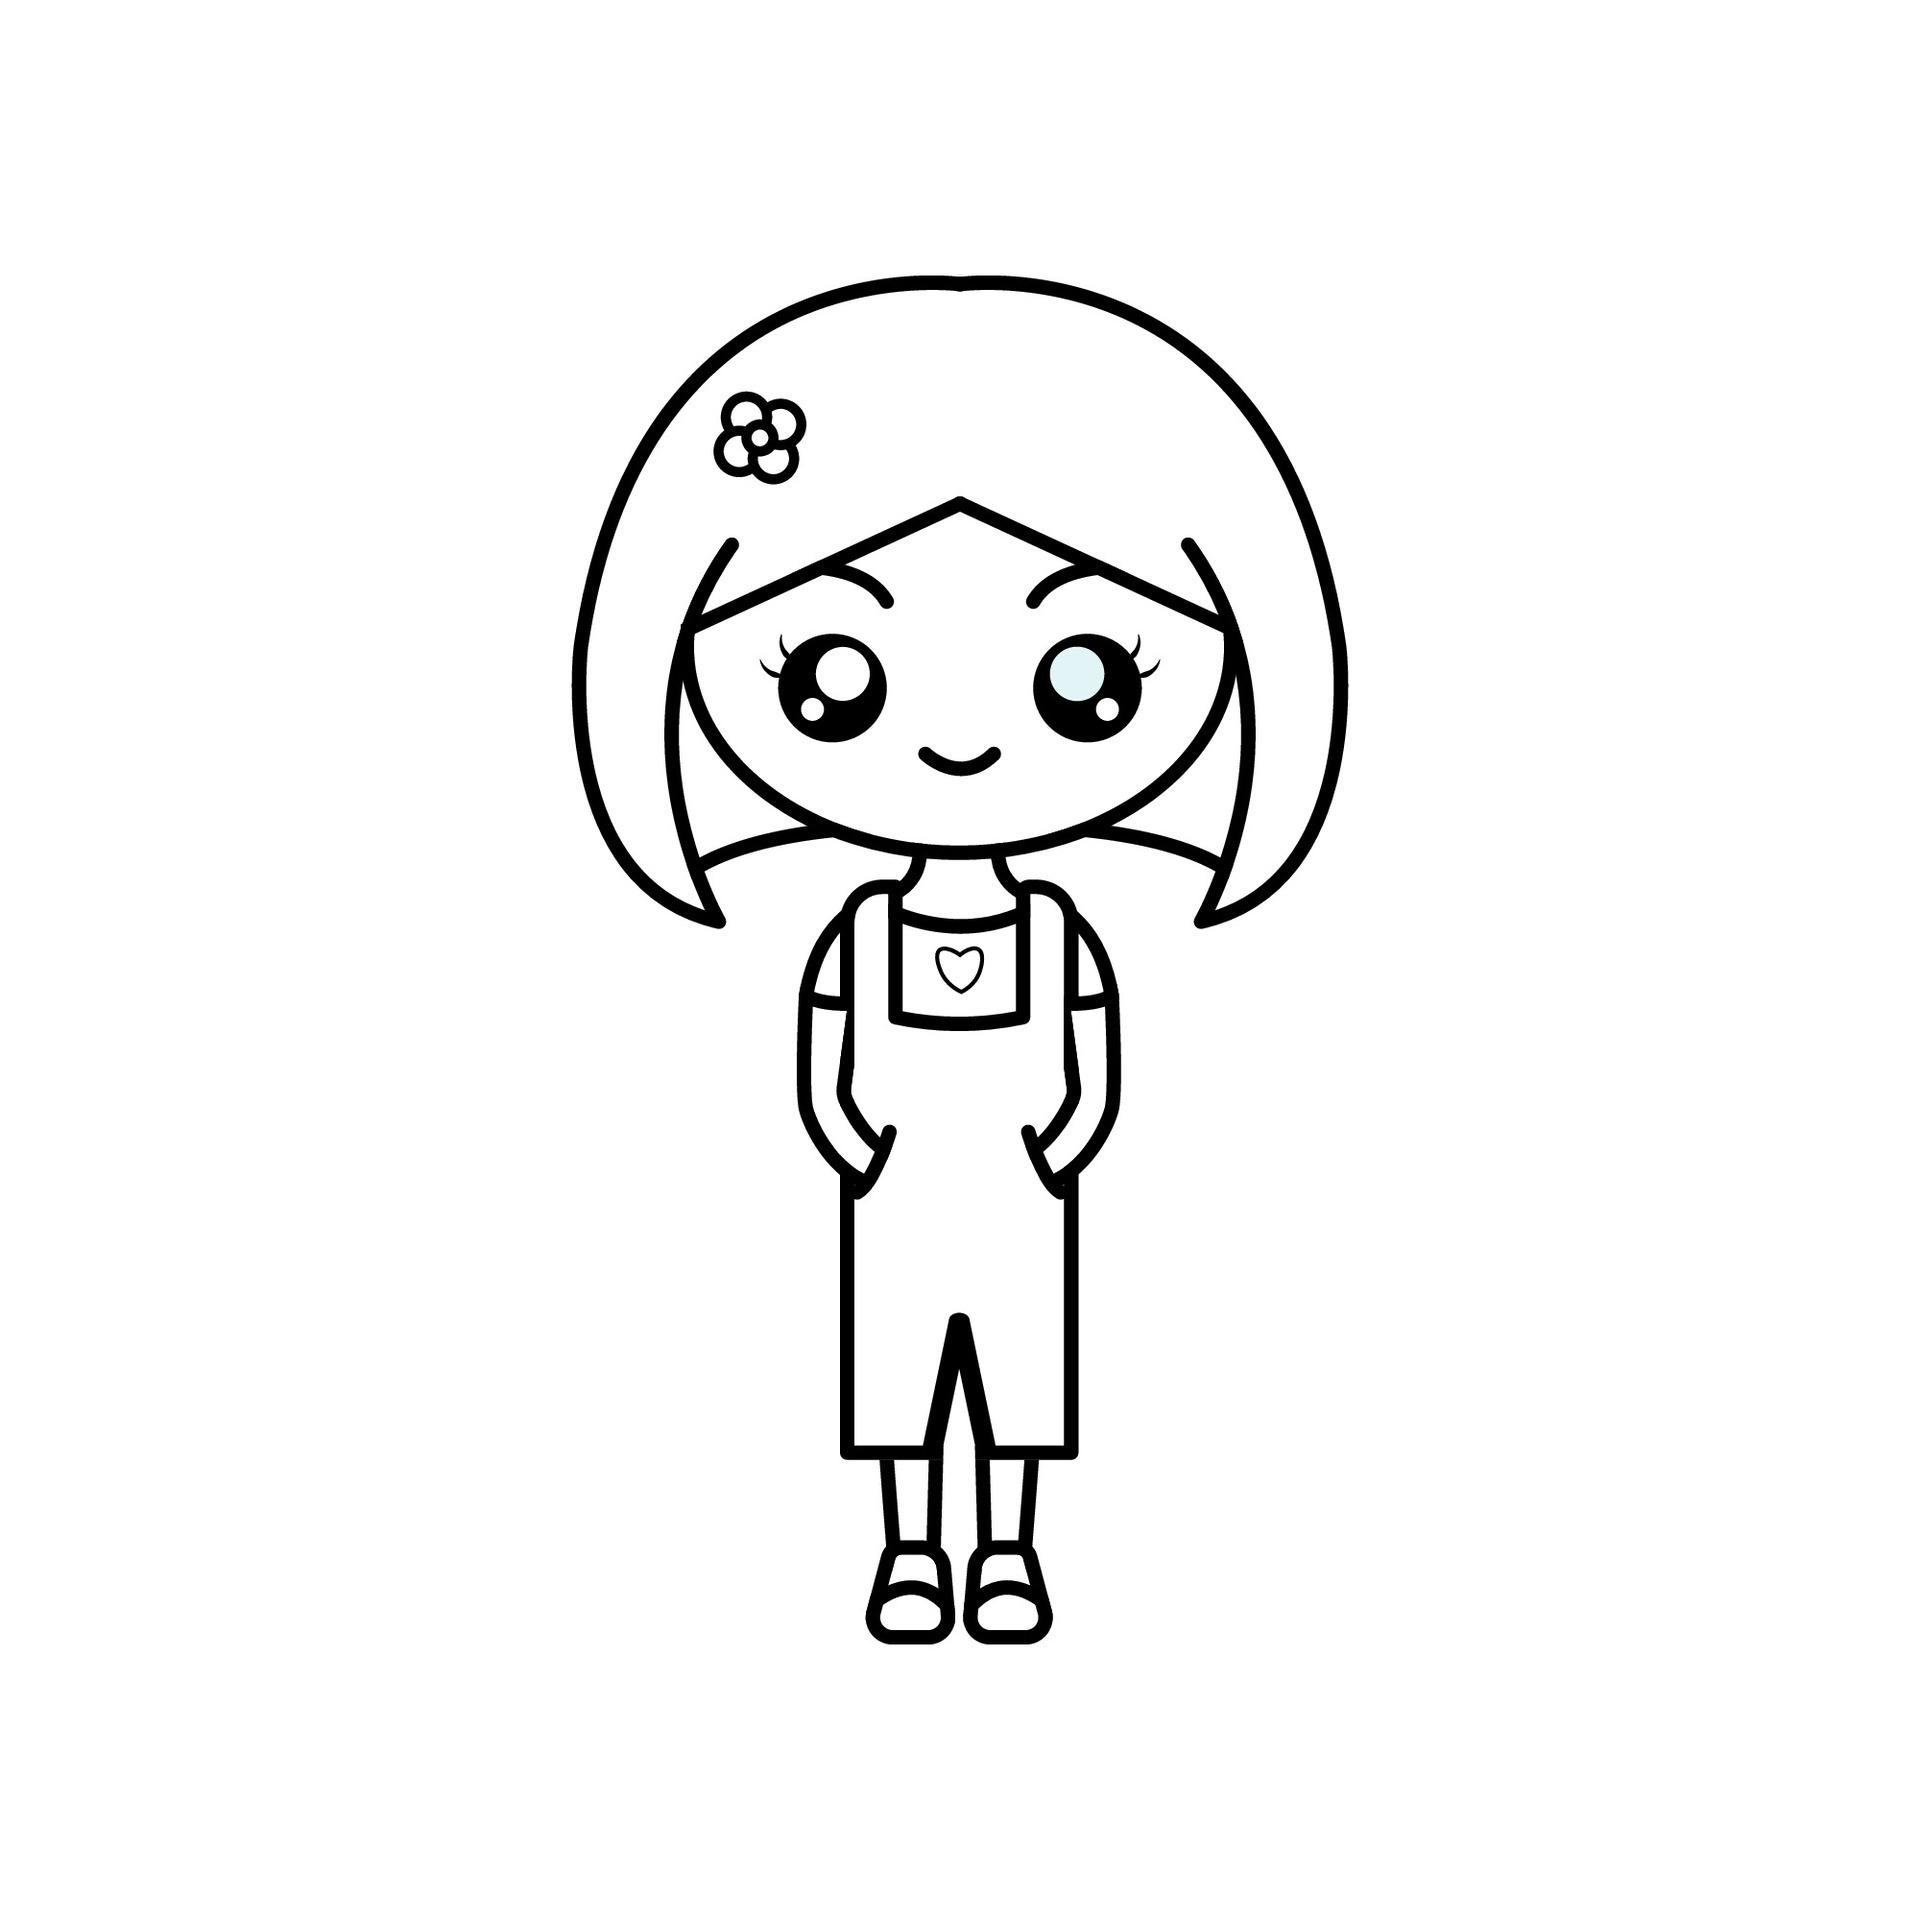 https://static.vecteezy.com/system/resources/previews/026/273/350/original/cute-girl-cartoon-for-drawing-book-illustration-free-vector.jpg